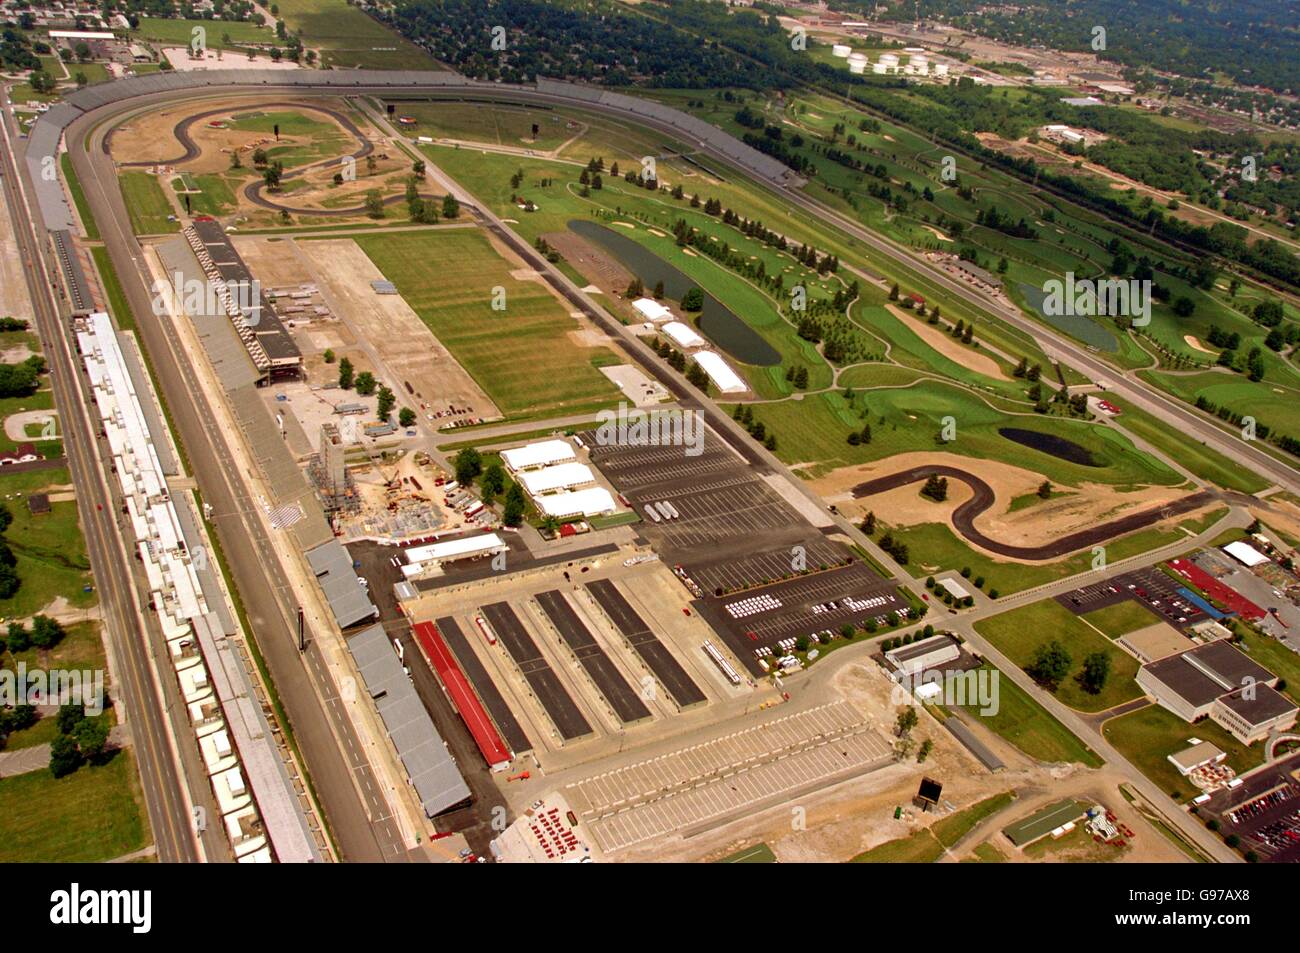 Formula One Motor Racing Indianapolis F1 Track. Aerial view of the